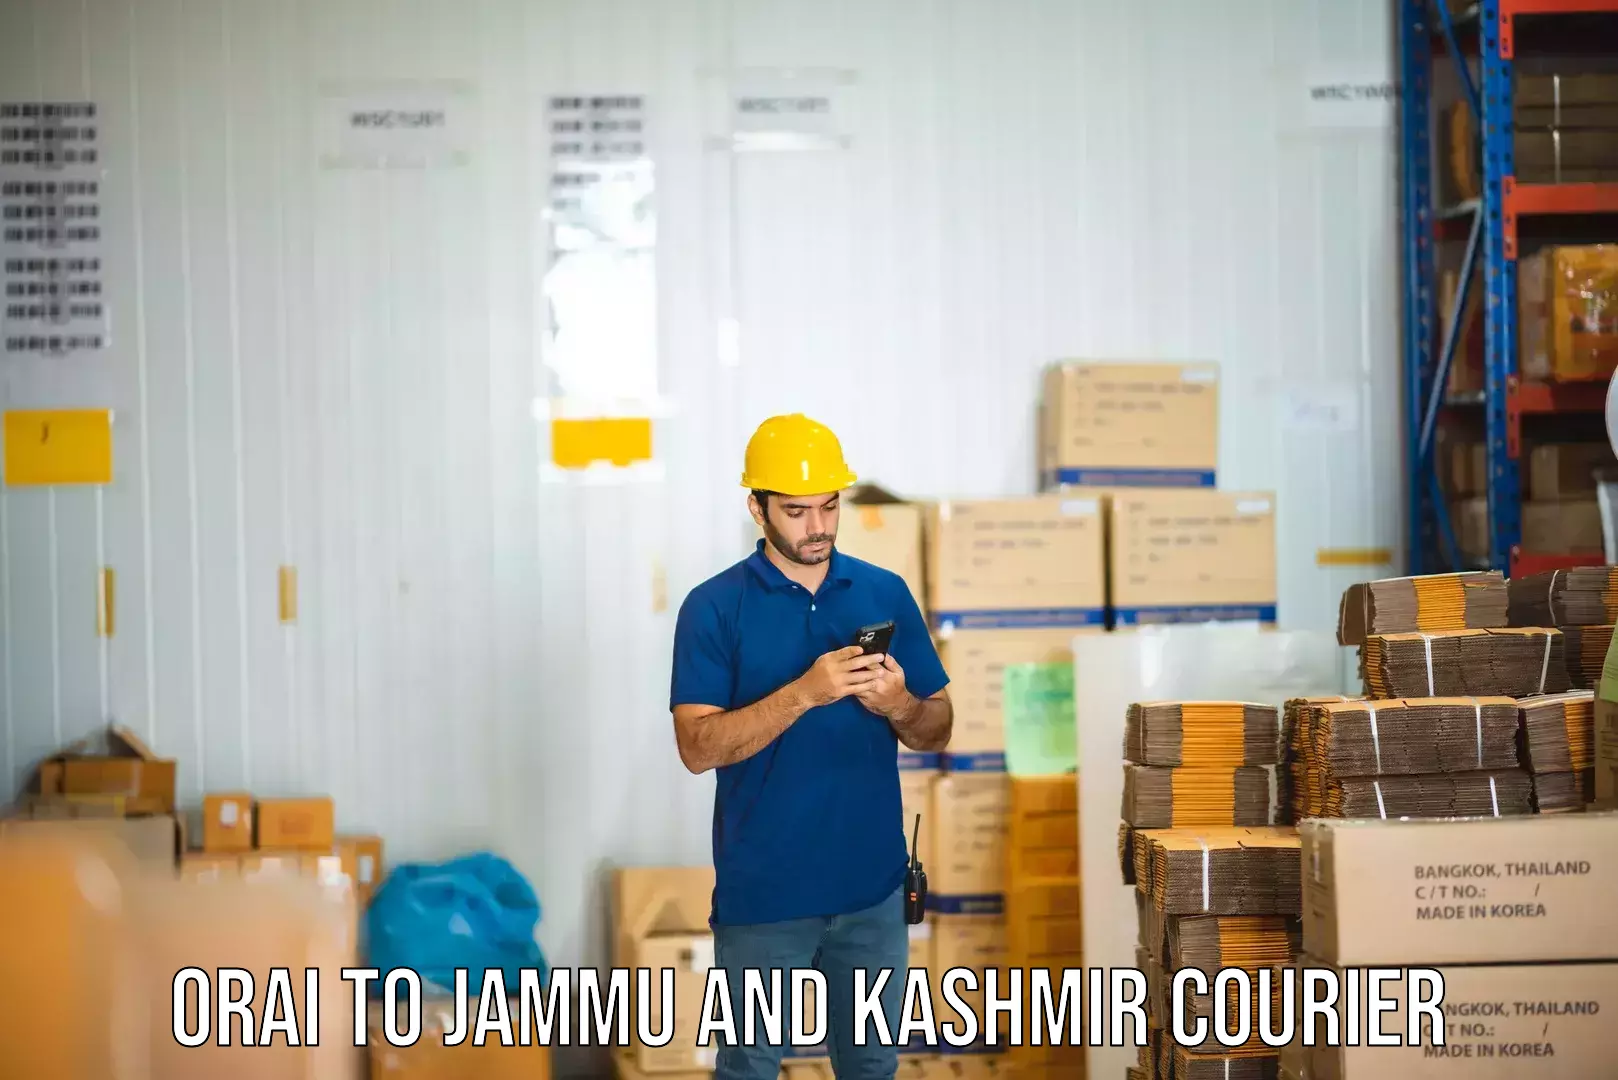 Supply chain efficiency in Orai to Jammu and Kashmir